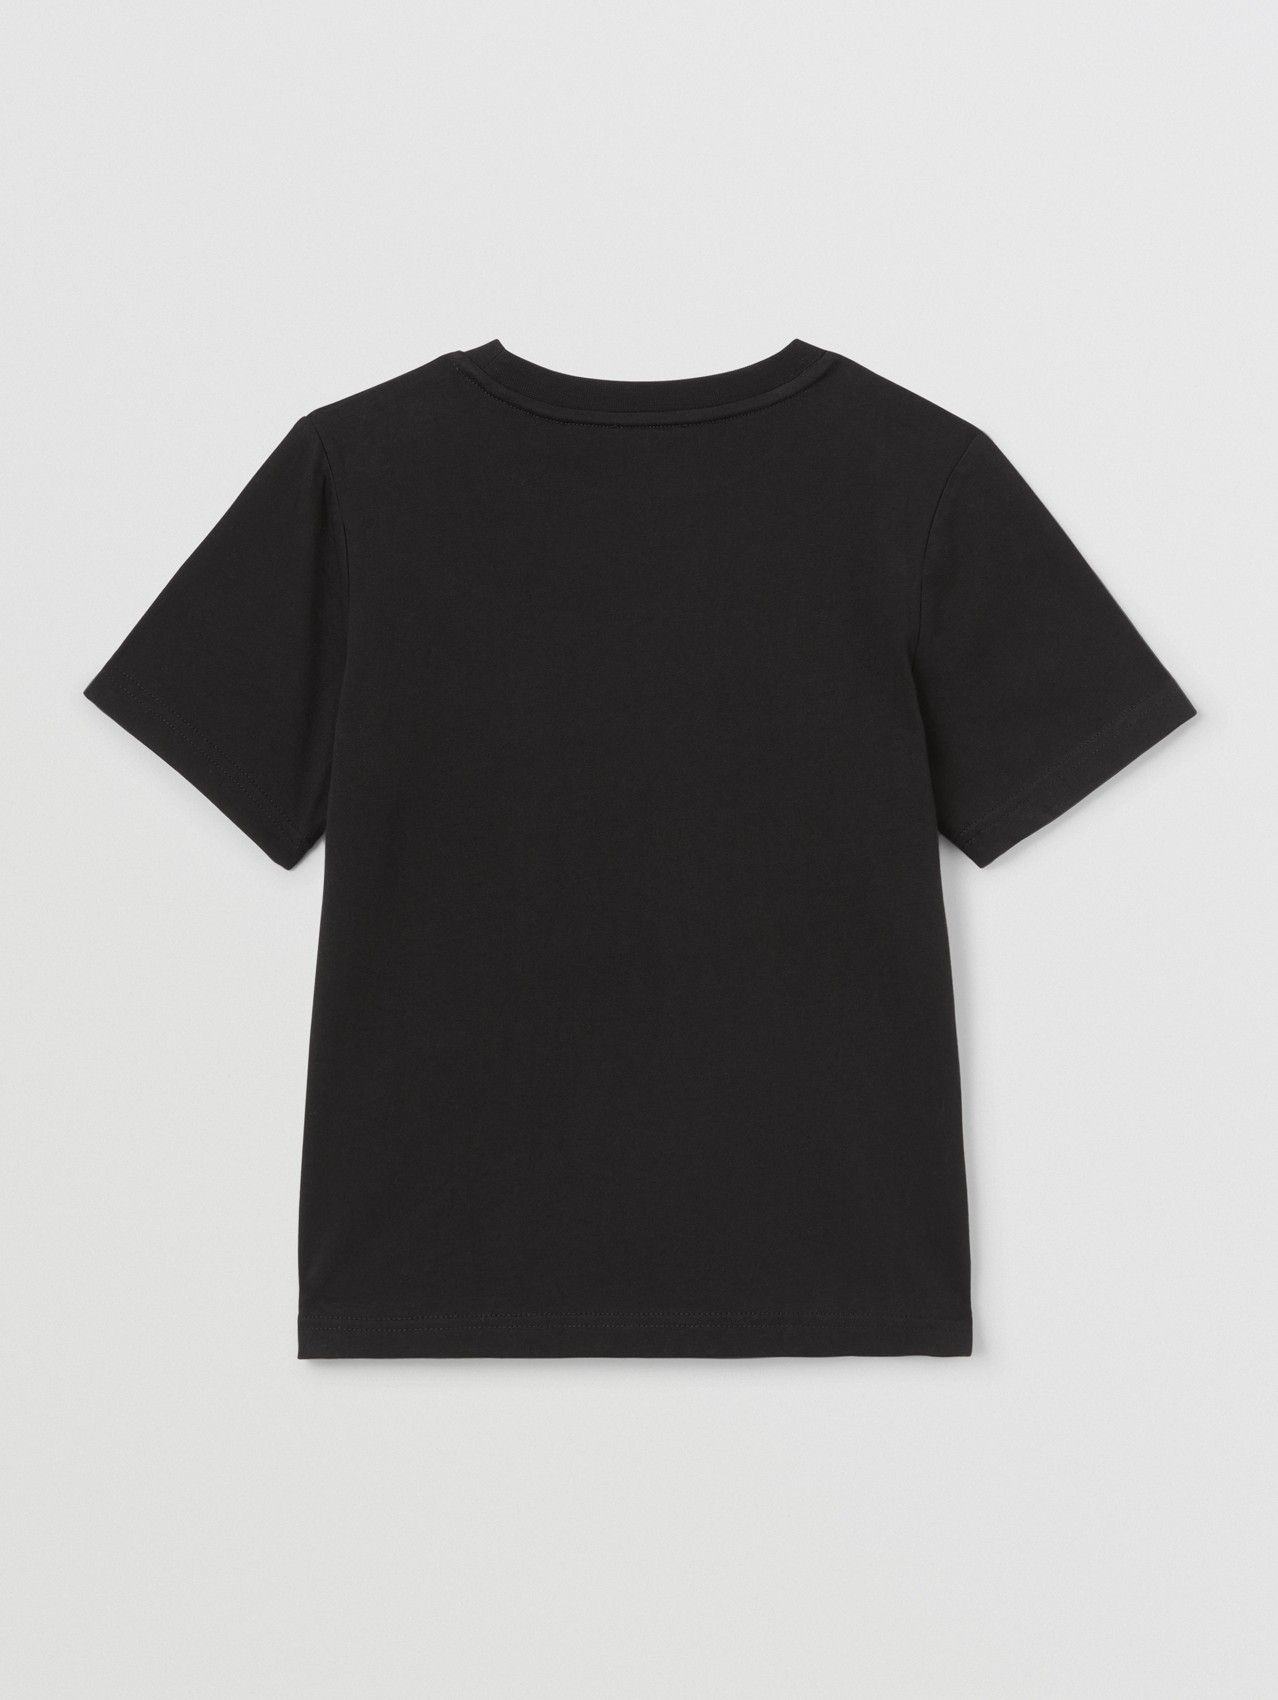 Embroidered Logo Cotton T-shirt in Black